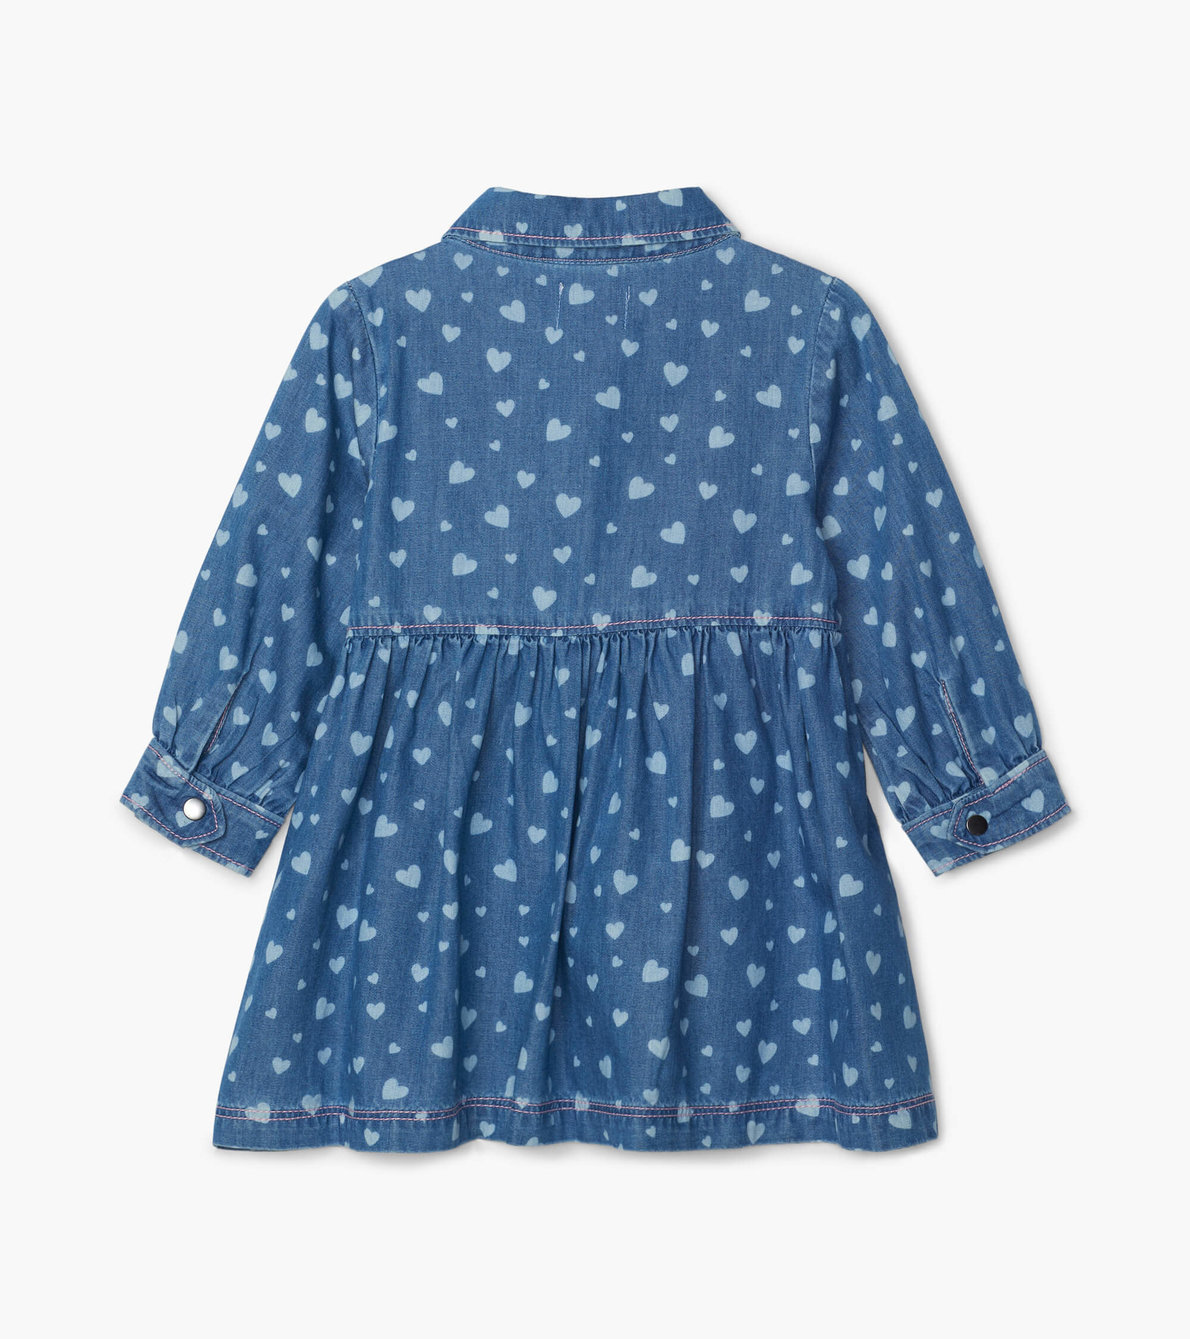 View larger image of Heart Cluster Baby Denim Dress